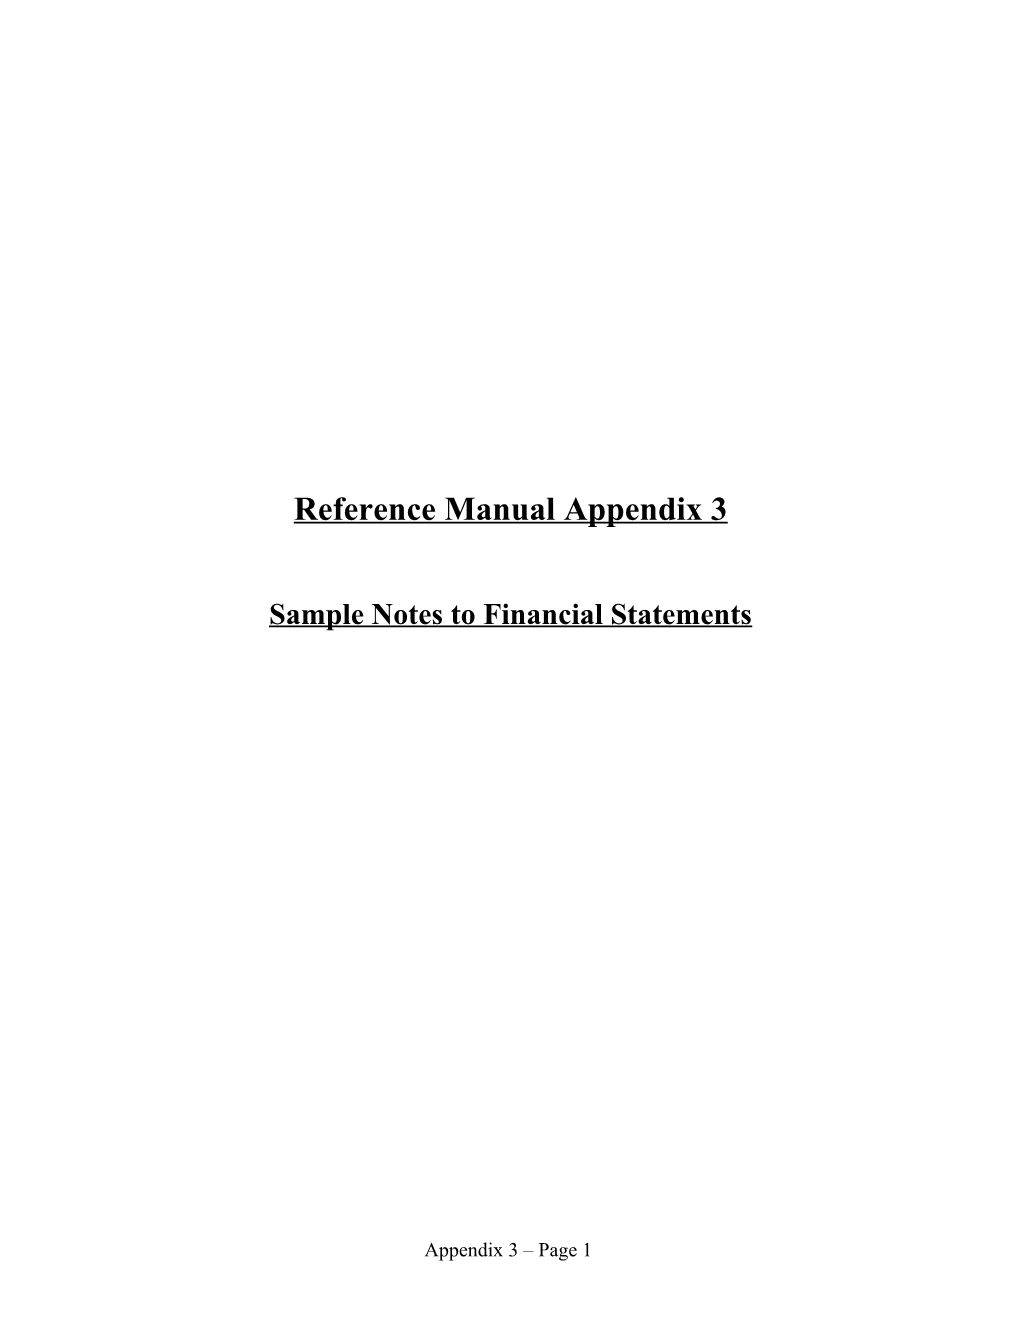 Financial Statement Draft Notes